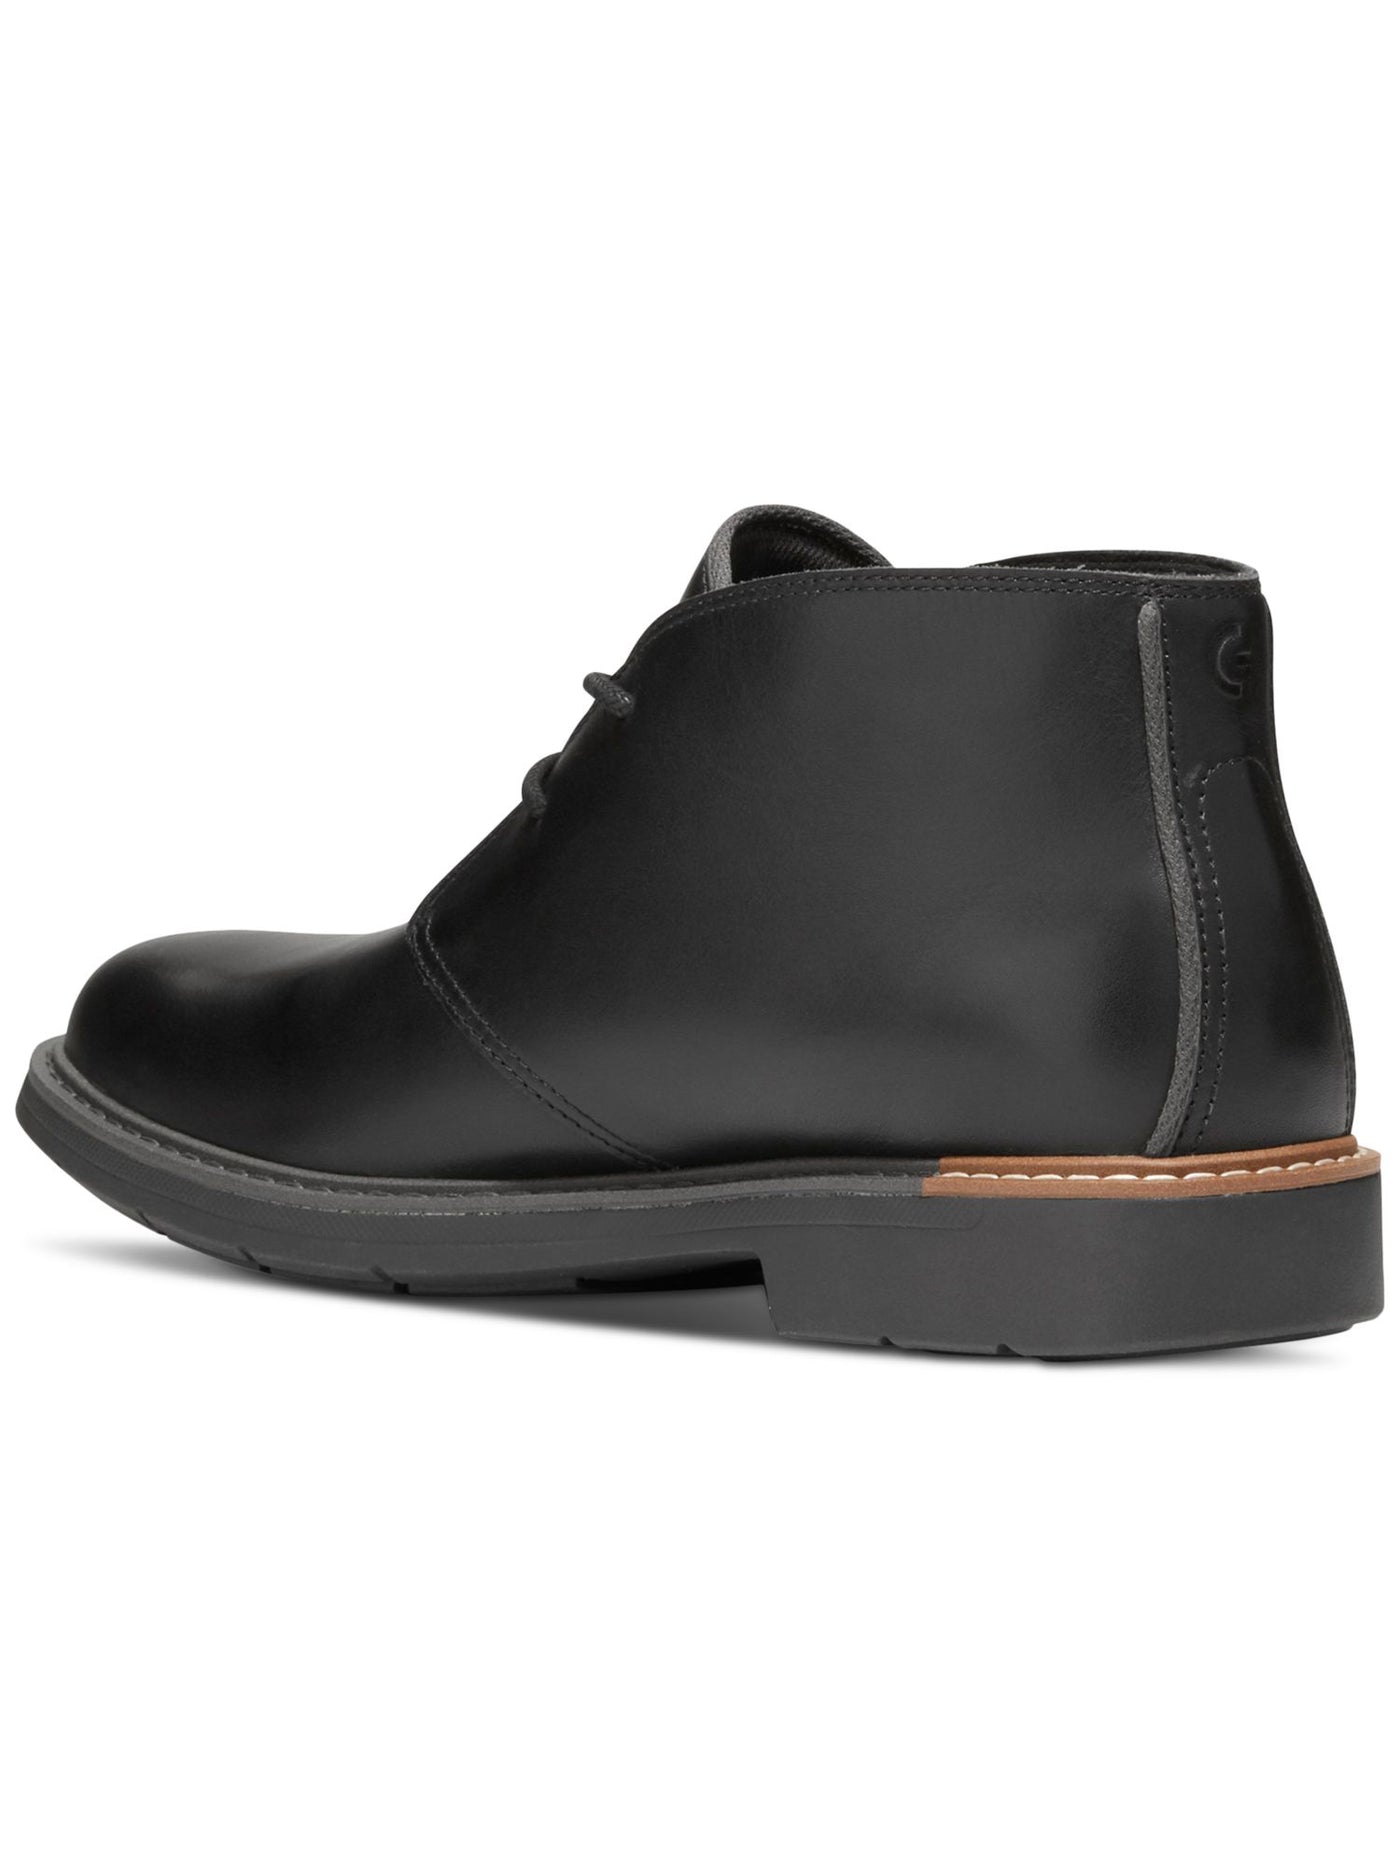 COLE HAAN GRANDSERIES Mens Black Cushioned Lightweight Go-to Round Toe Block Heel Lace-Up Leather Chukka Boots 11.5 M